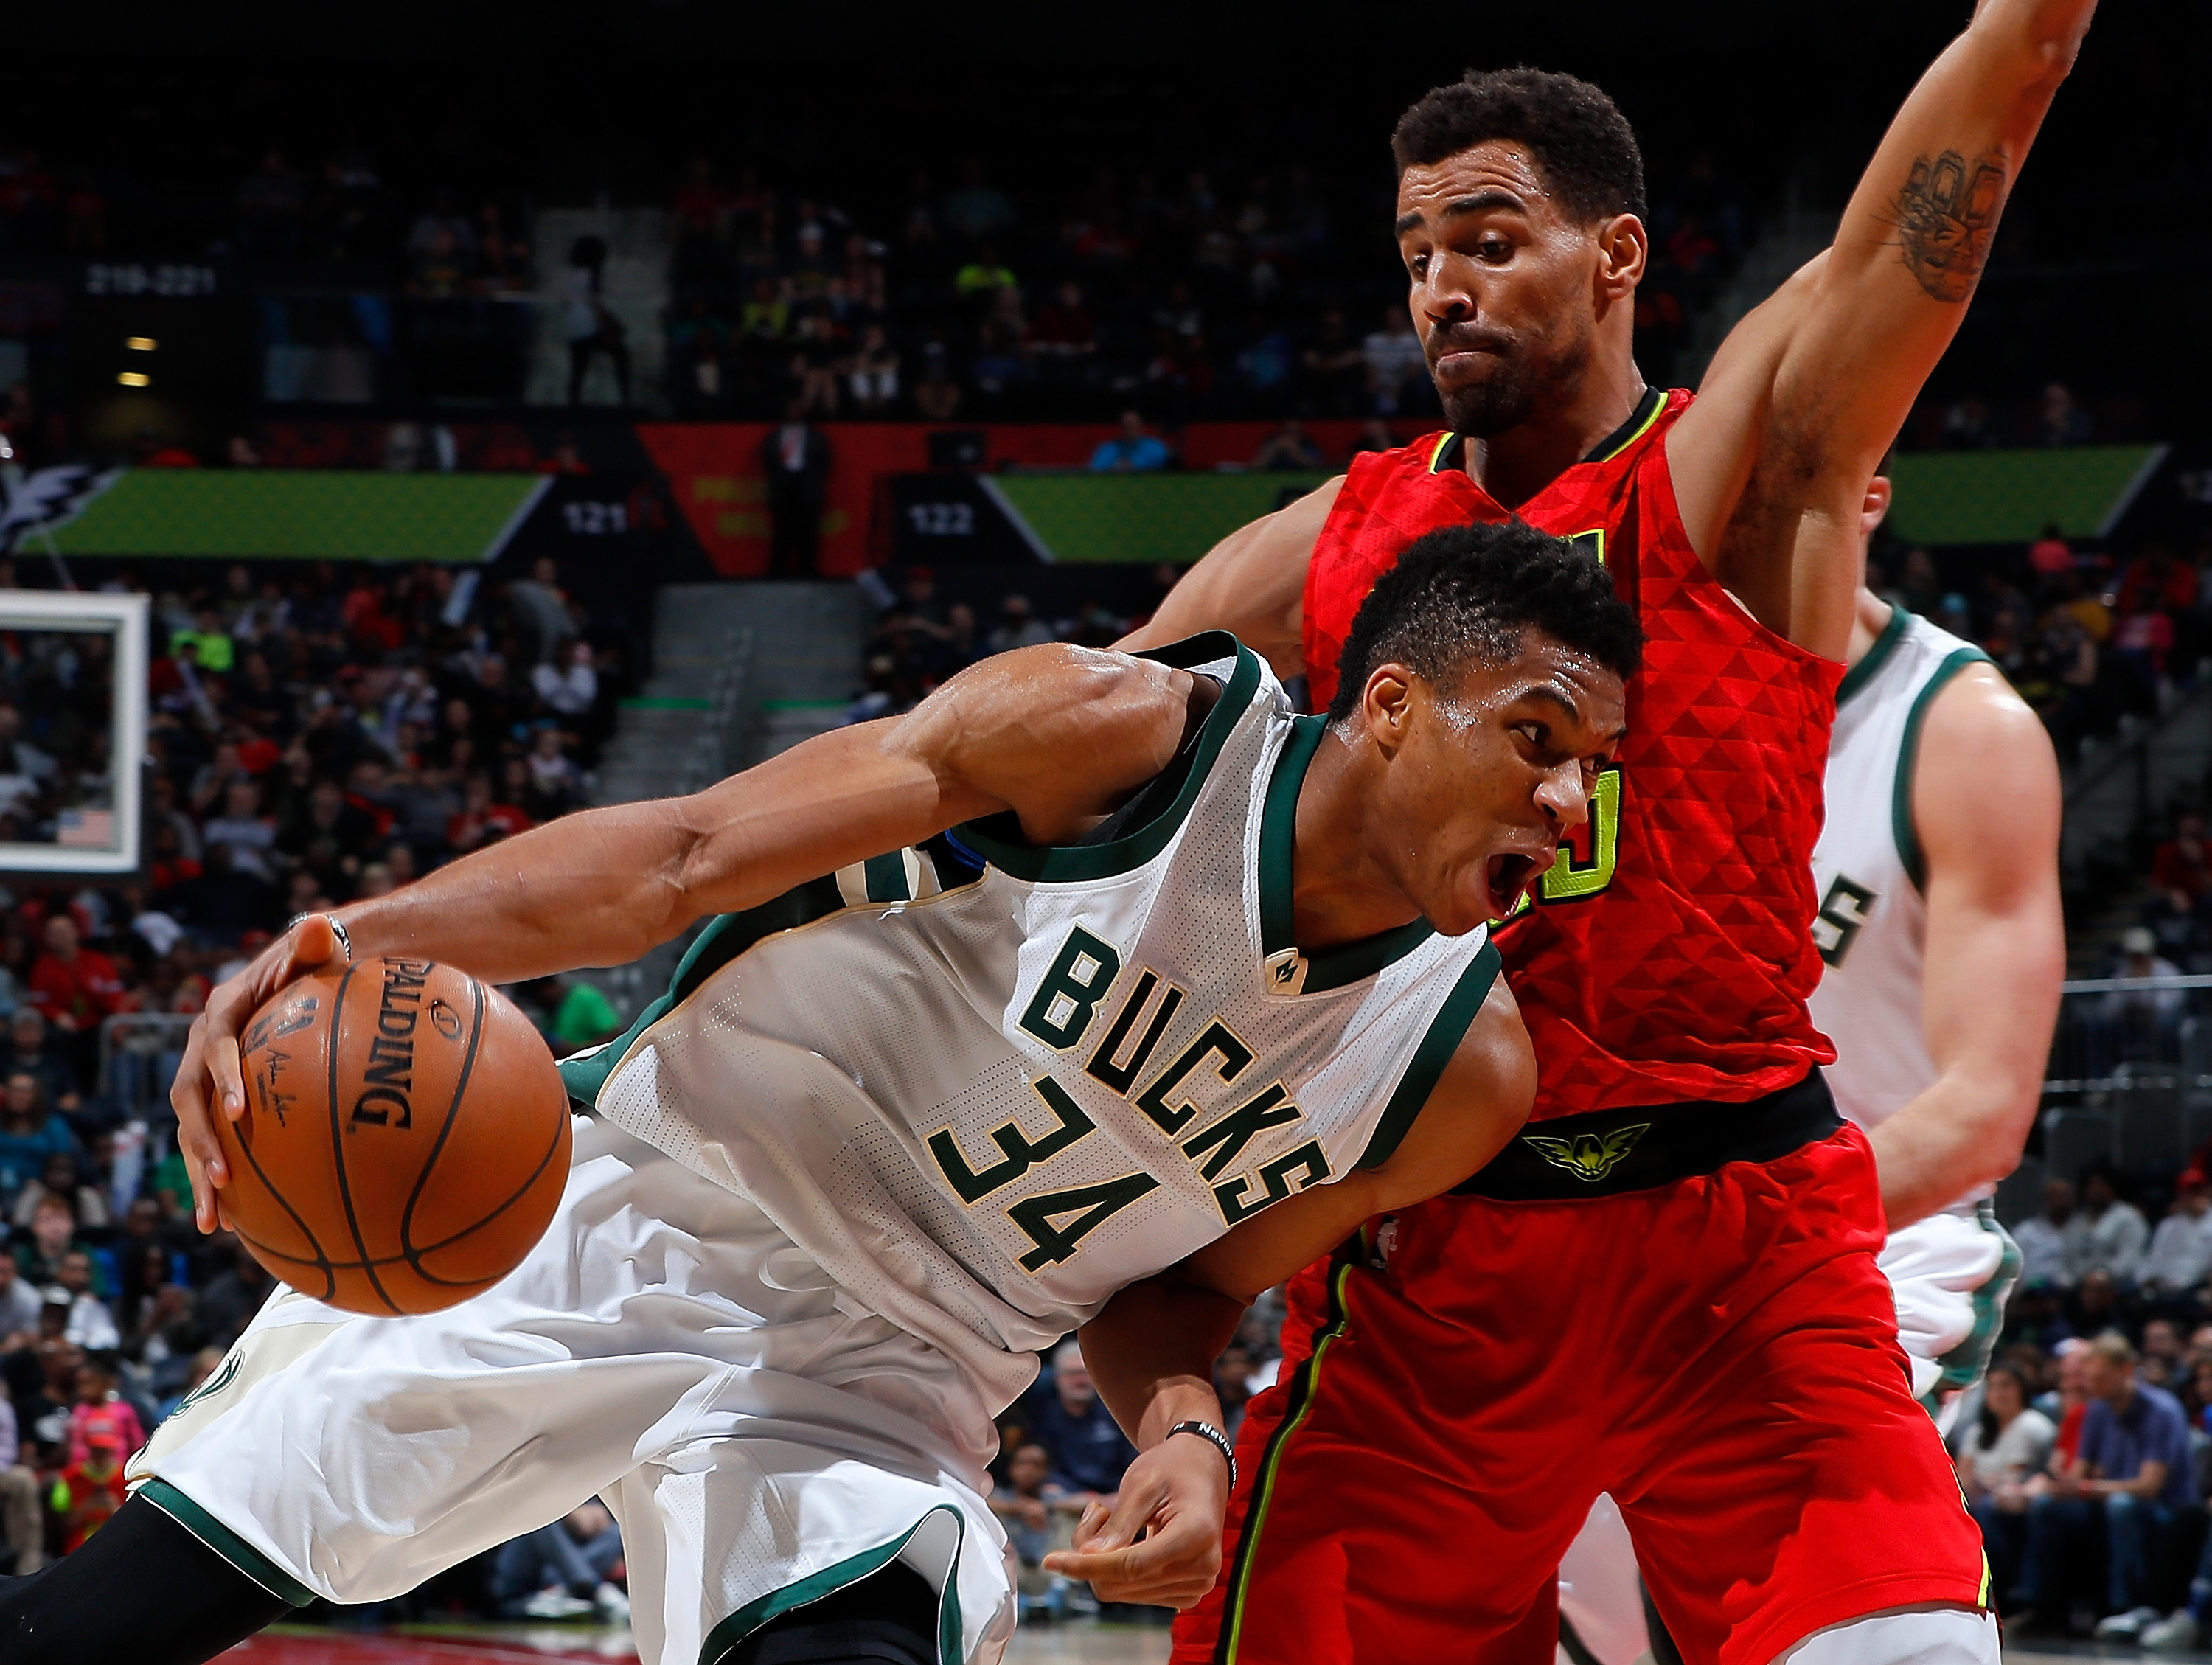 ATLANTA, GA - JANUARY 15: Giannis Antetokounmpo #34 of the Milwaukee Bucks drives against Thabo Sefolosha #25 of the Atlanta Hawks at Philips Arena on January 15, 2017 in Atlanta, Georgia. NOTE TO USER User expressly acknowledges and agrees that, by downloading and or using this photograph, user is consenting to the terms and conditions of the Getty Images License Agreement.   Kevin C. Cox/Getty Images/AFP